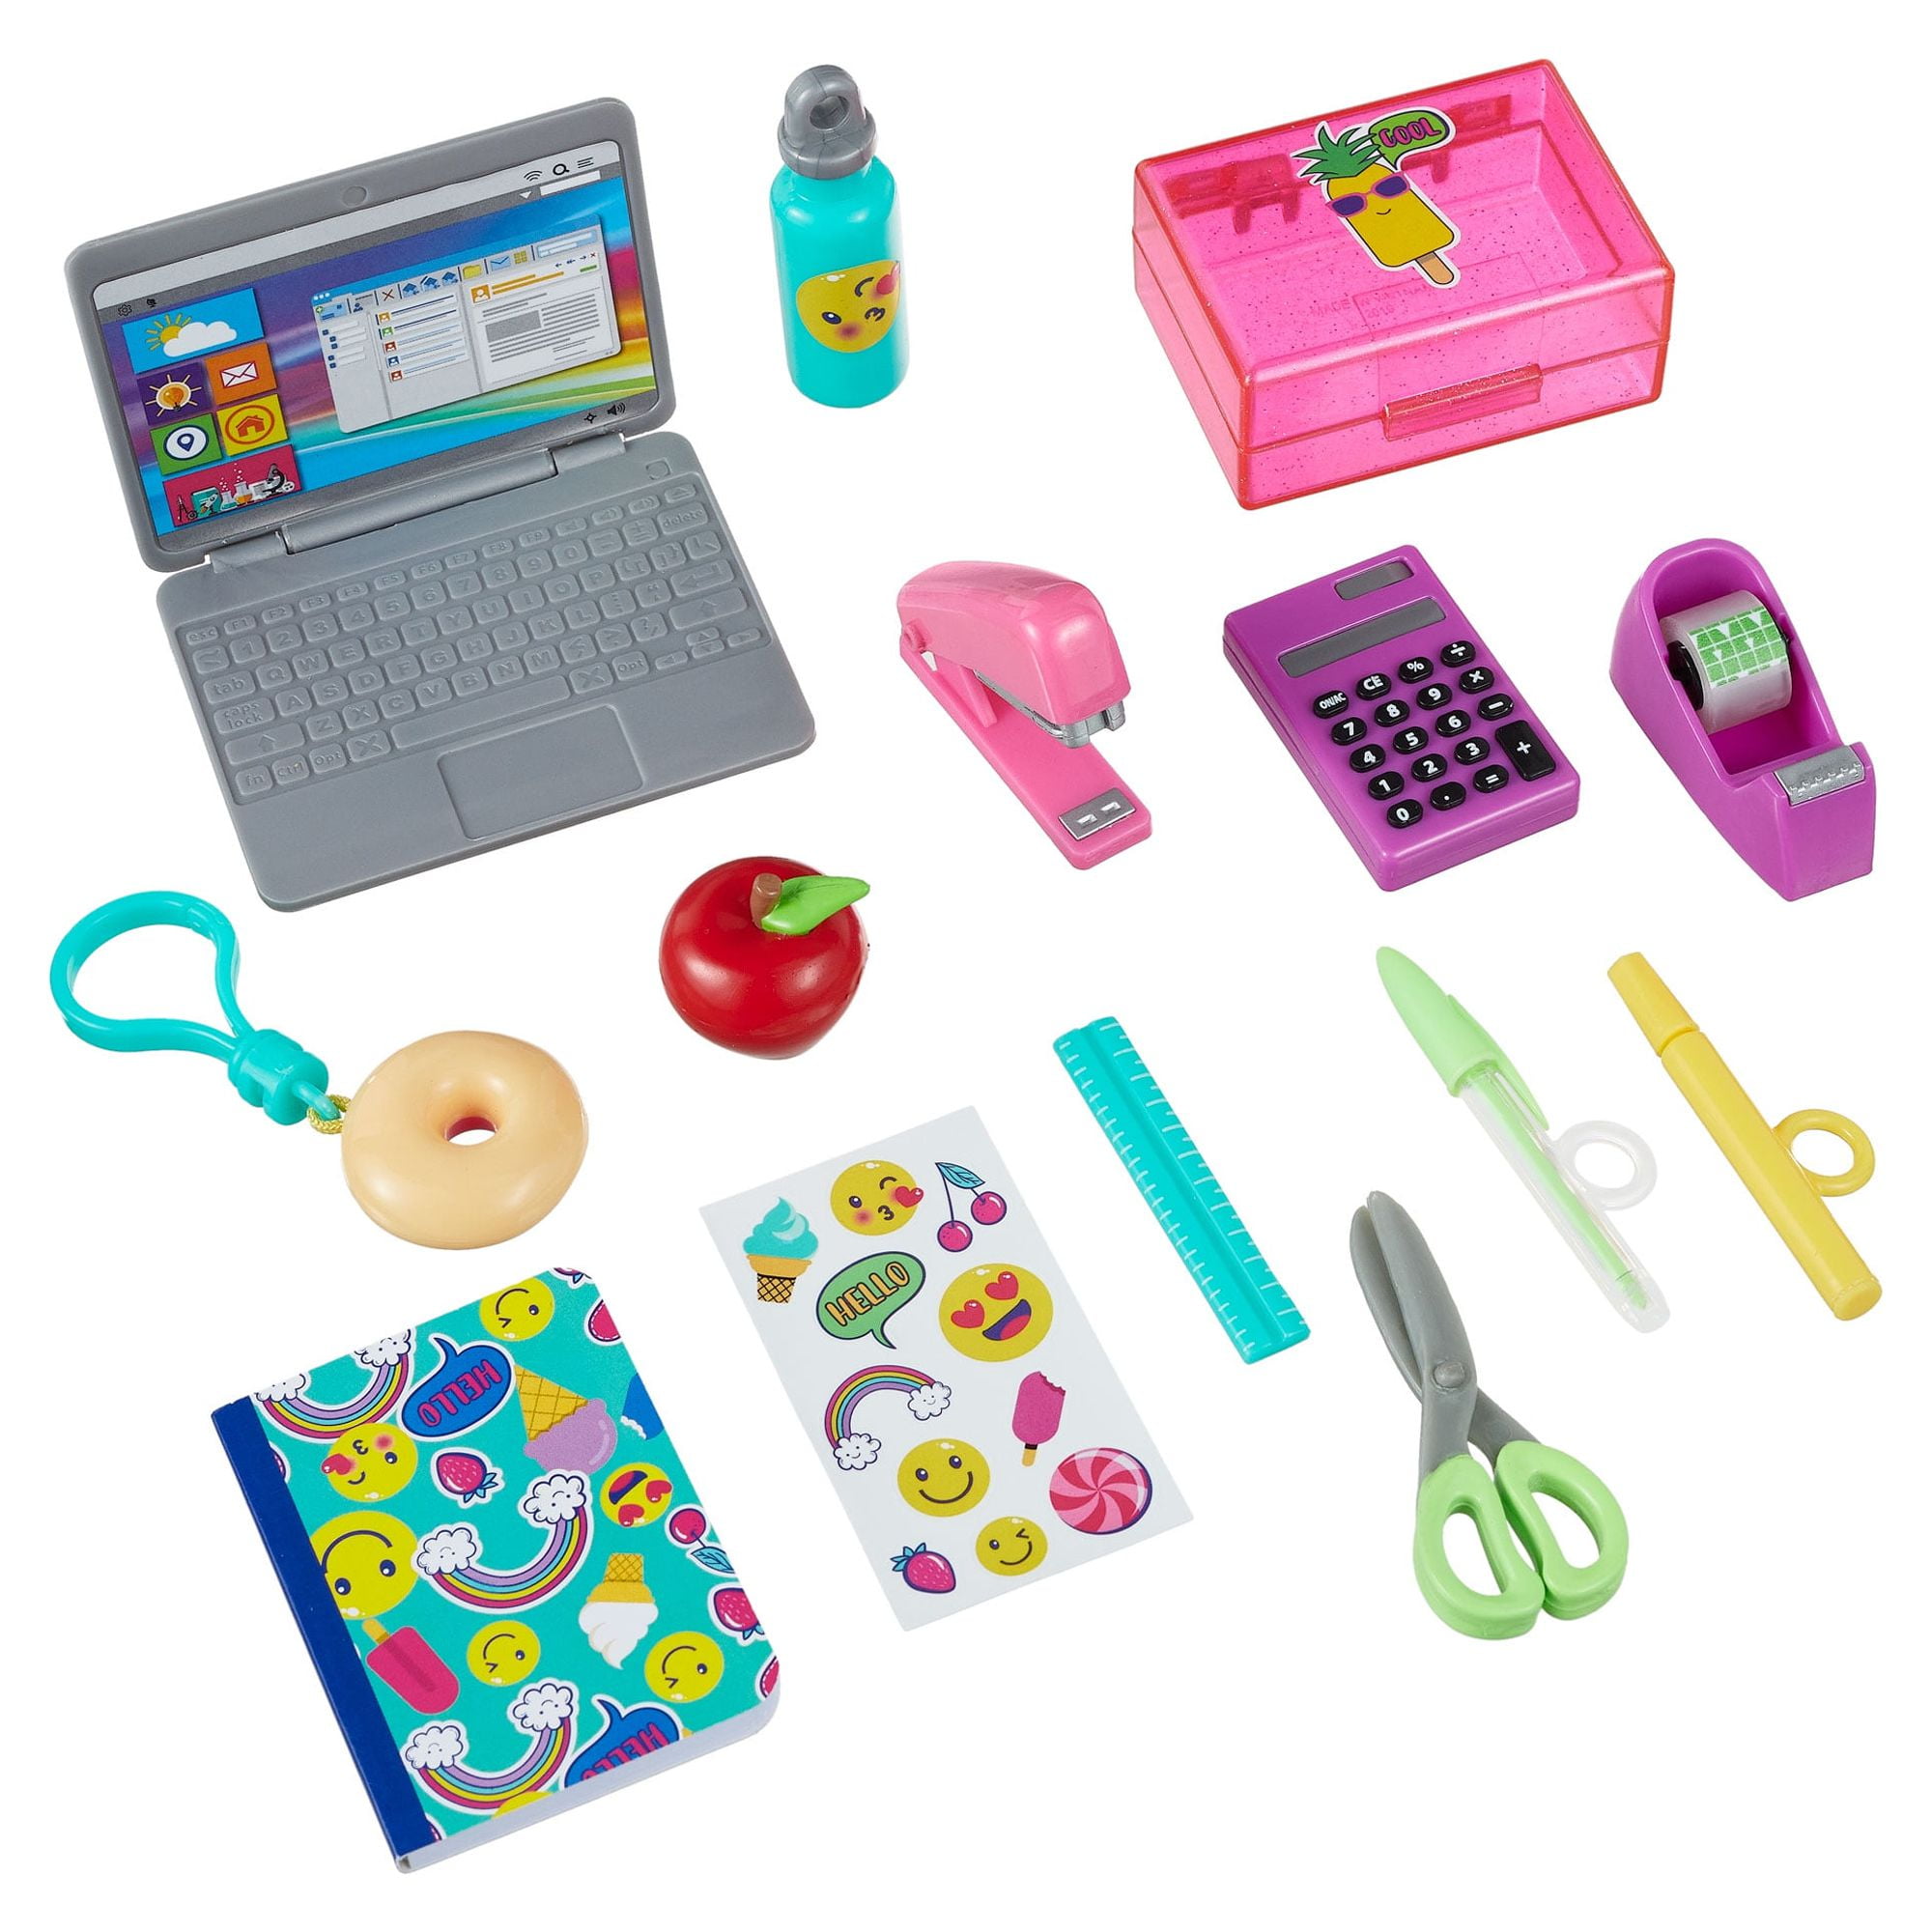 18 Cool School Supplies that Every Girl Needs